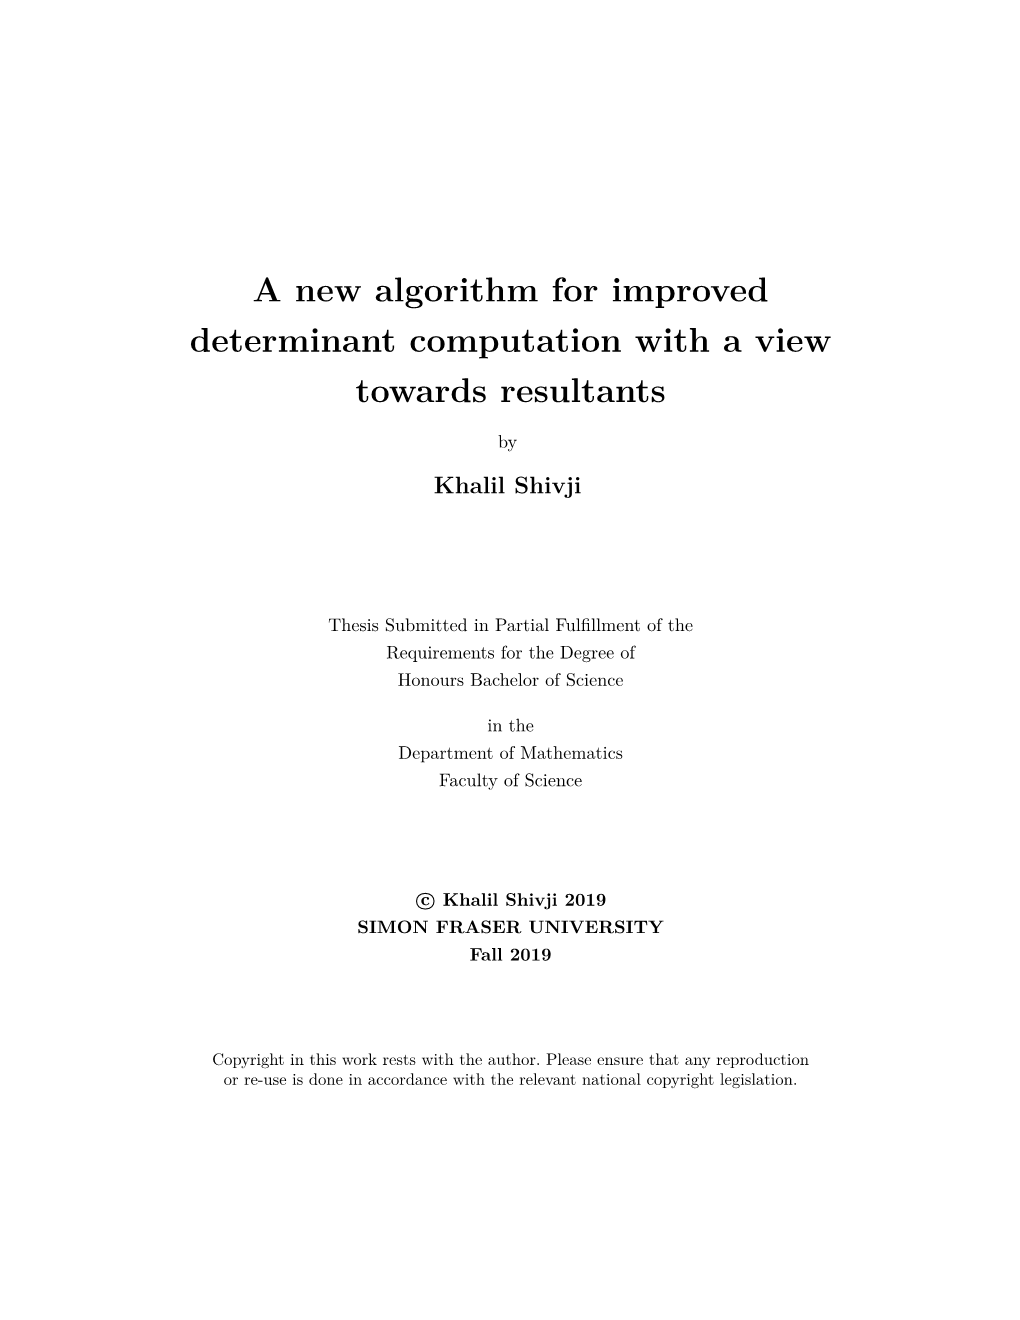 A New Algorithm for Improved Determinant Computation with a View Towards Resultants